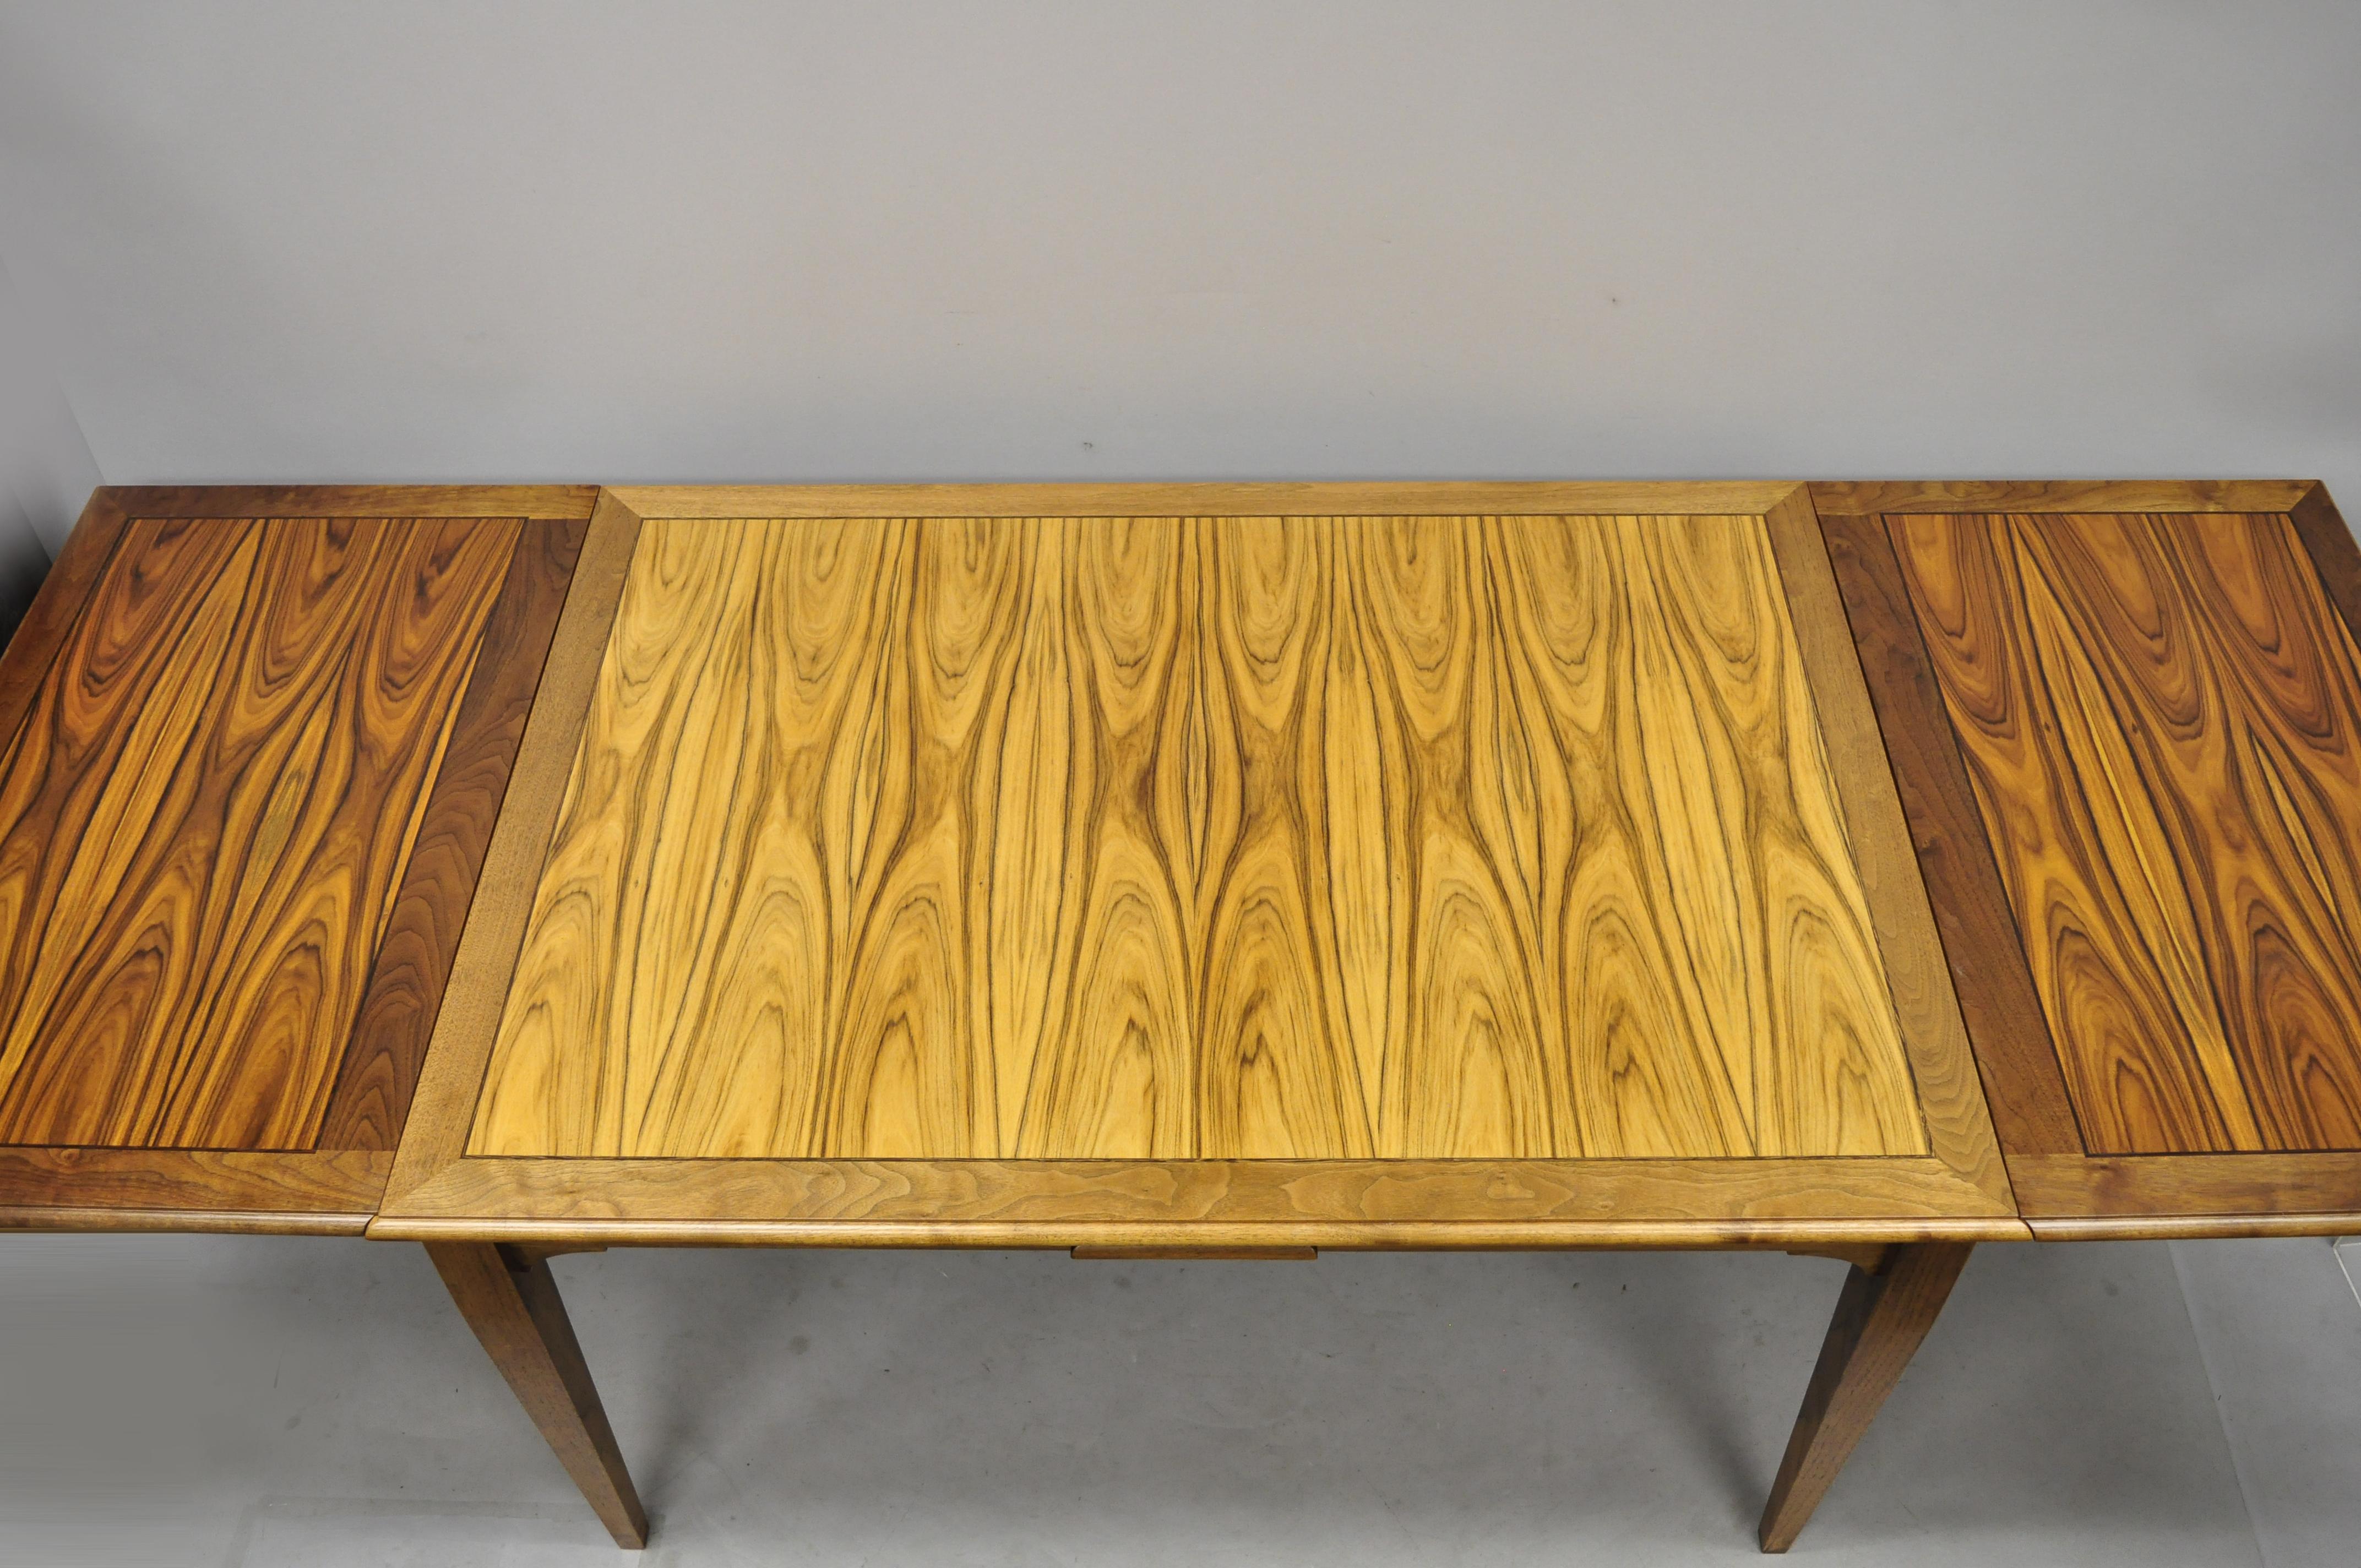 American Rosewood Danish Mid-Century Modern Style Extension Dining Table by Paul Downs For Sale